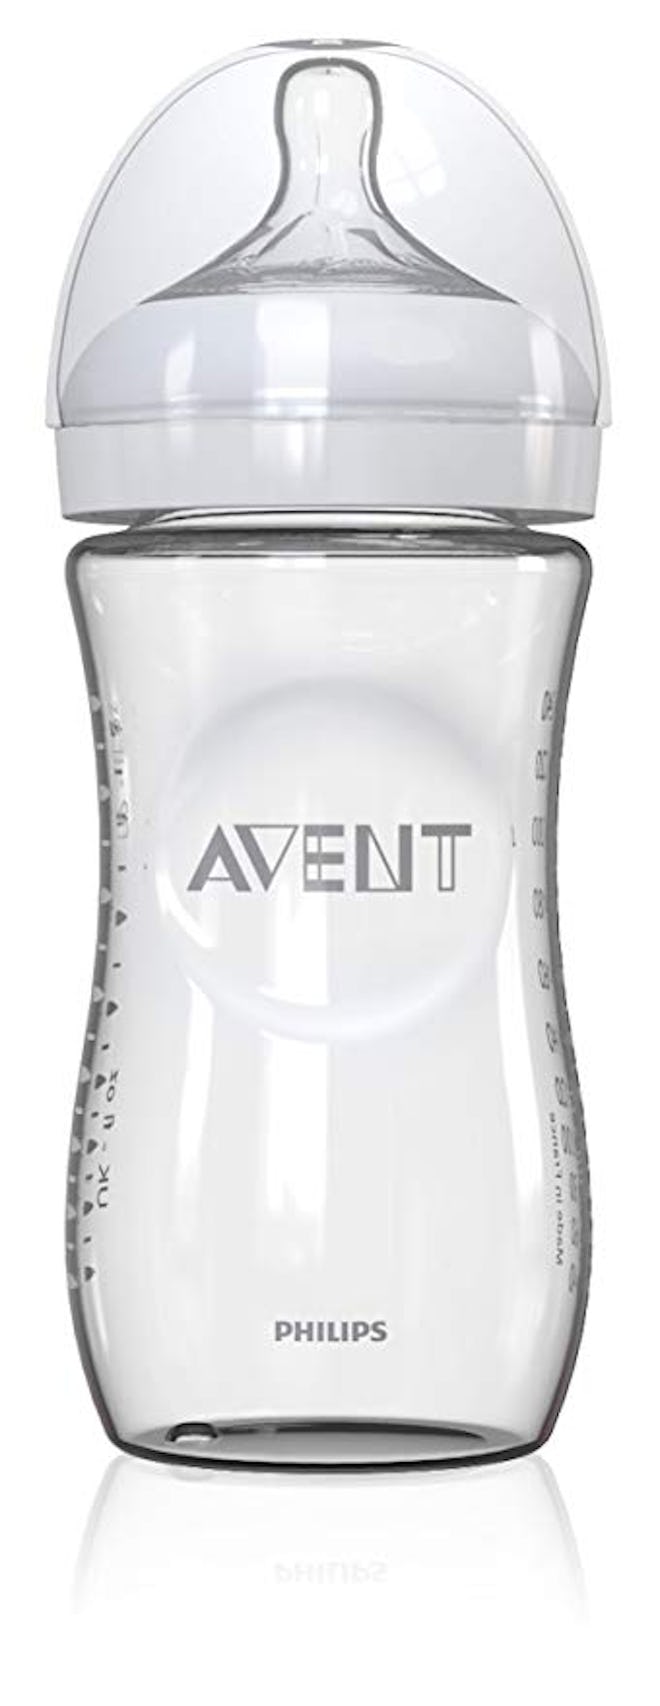 Philips Avent Natural Glass Baby Bottle, 8 Ounce